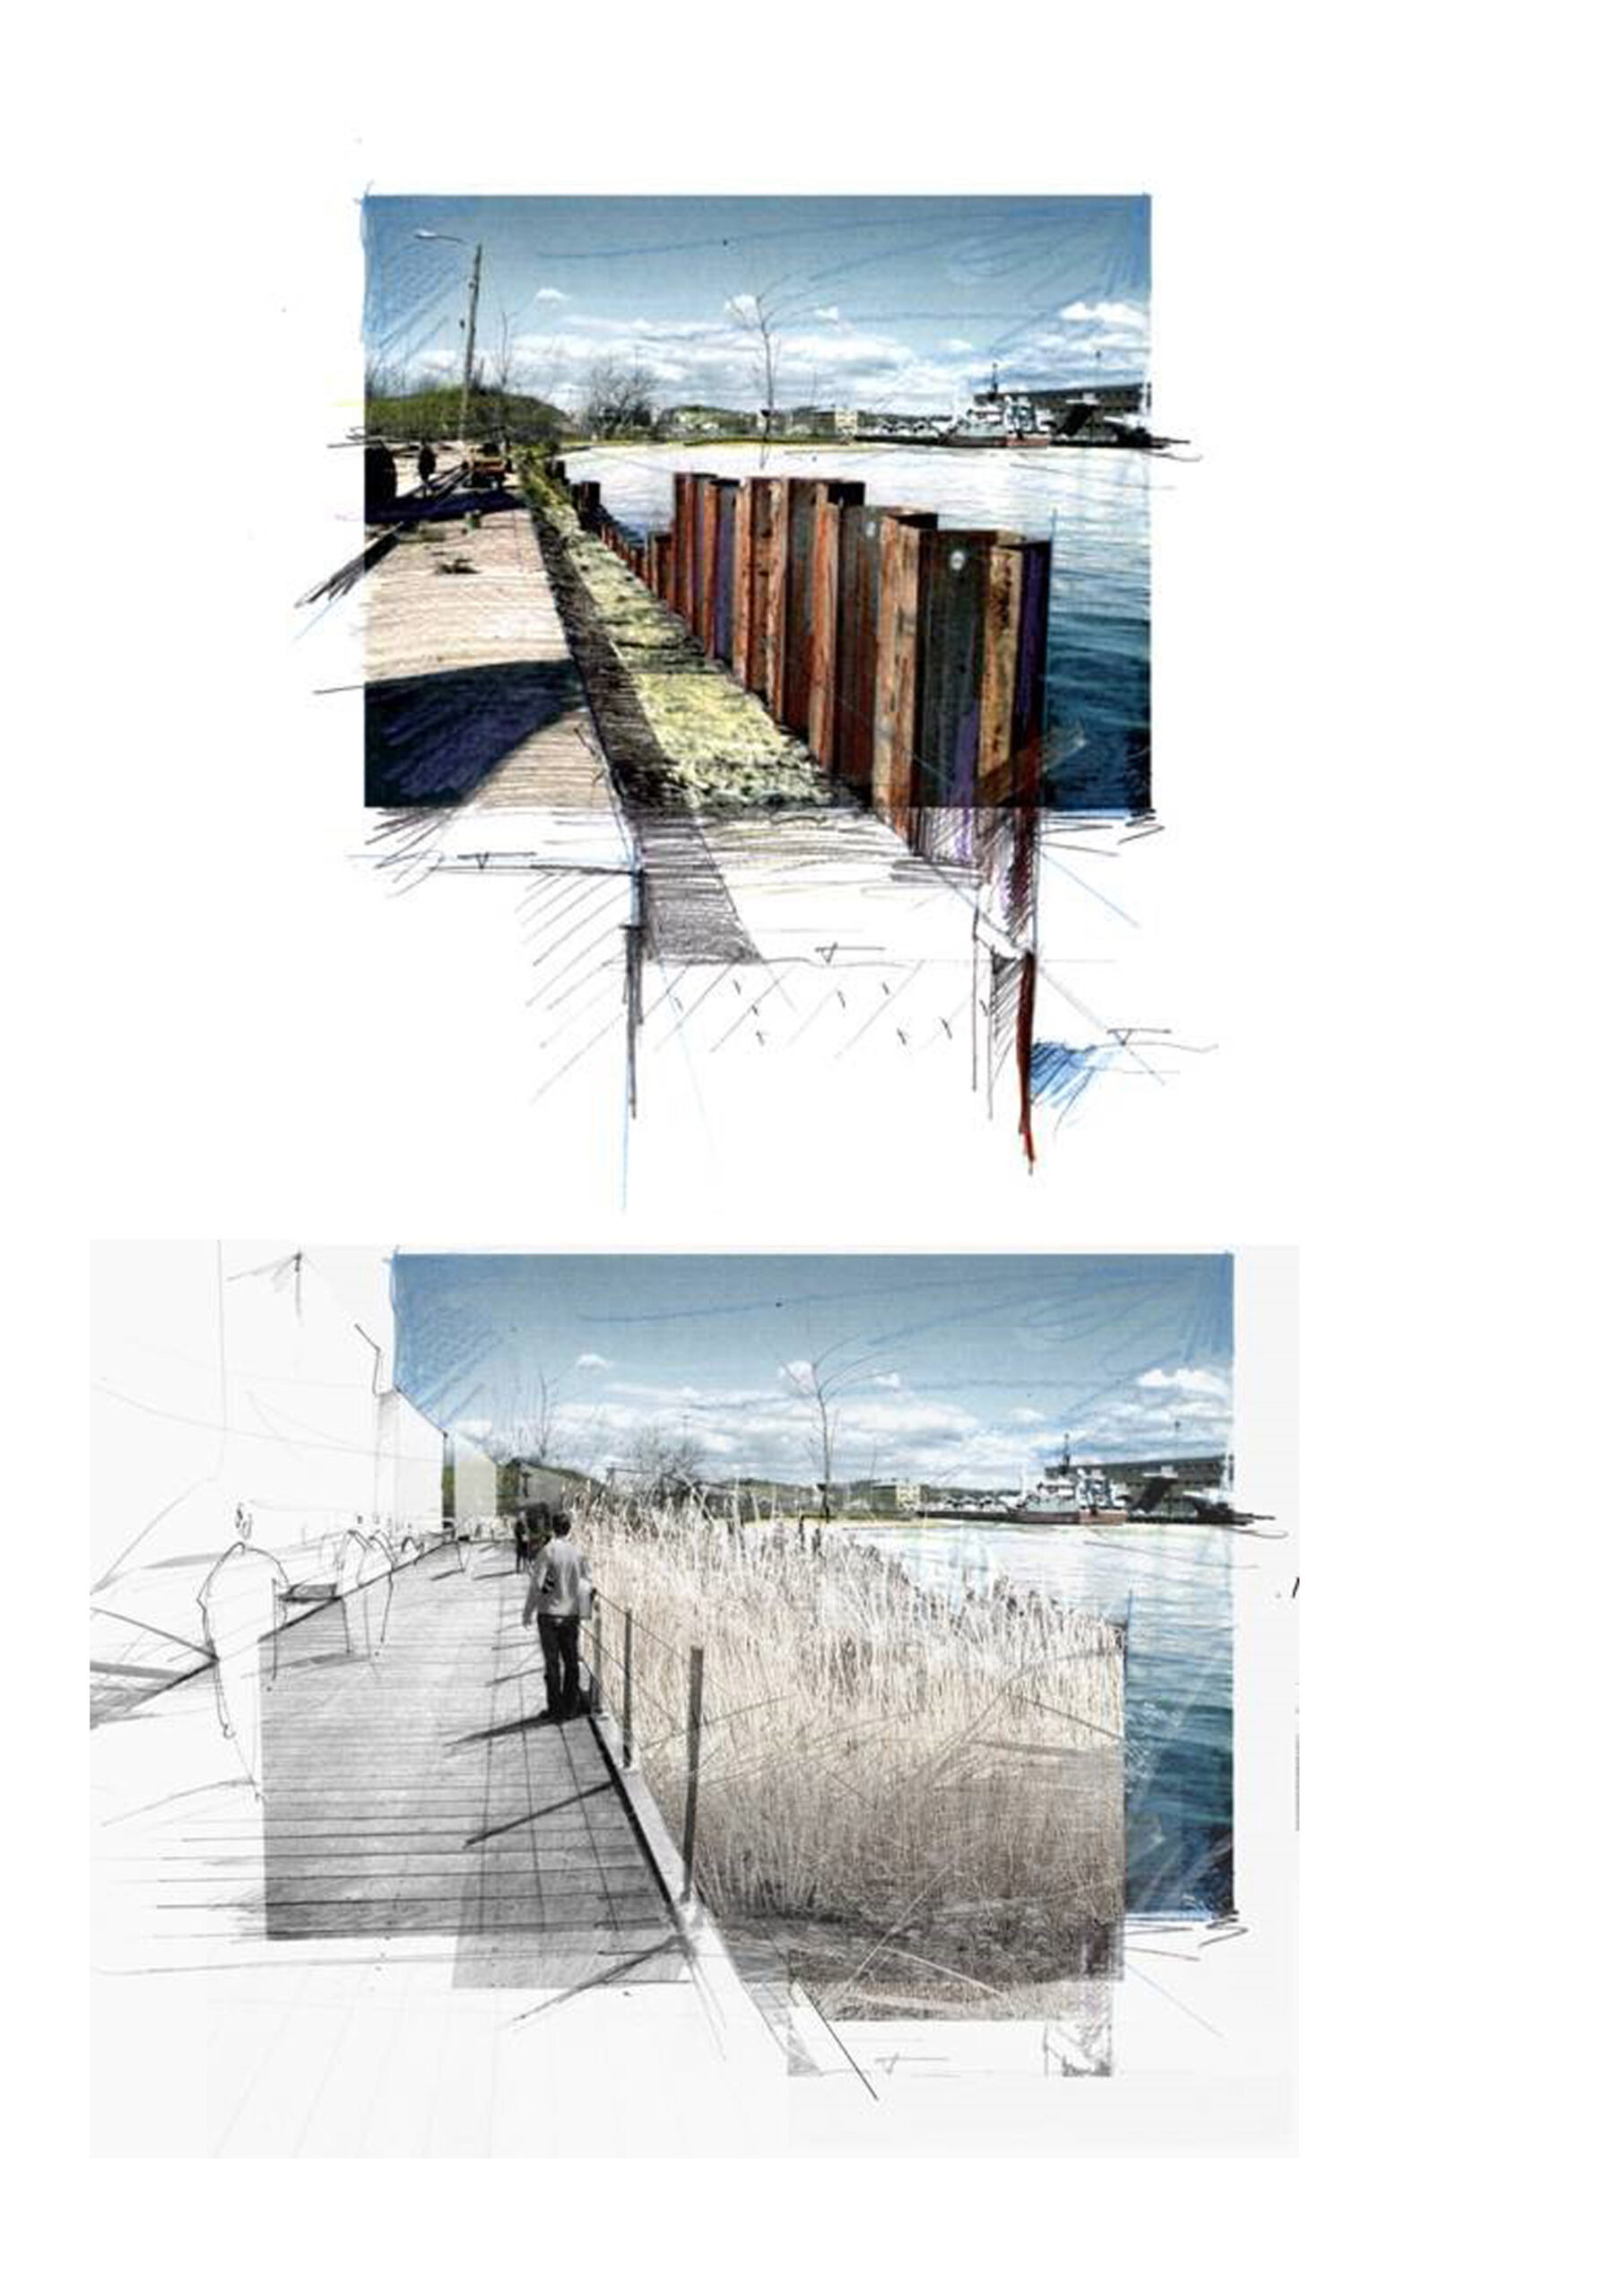 Sketches of boardwalks, concetion to the water and vegetations 
strategies.